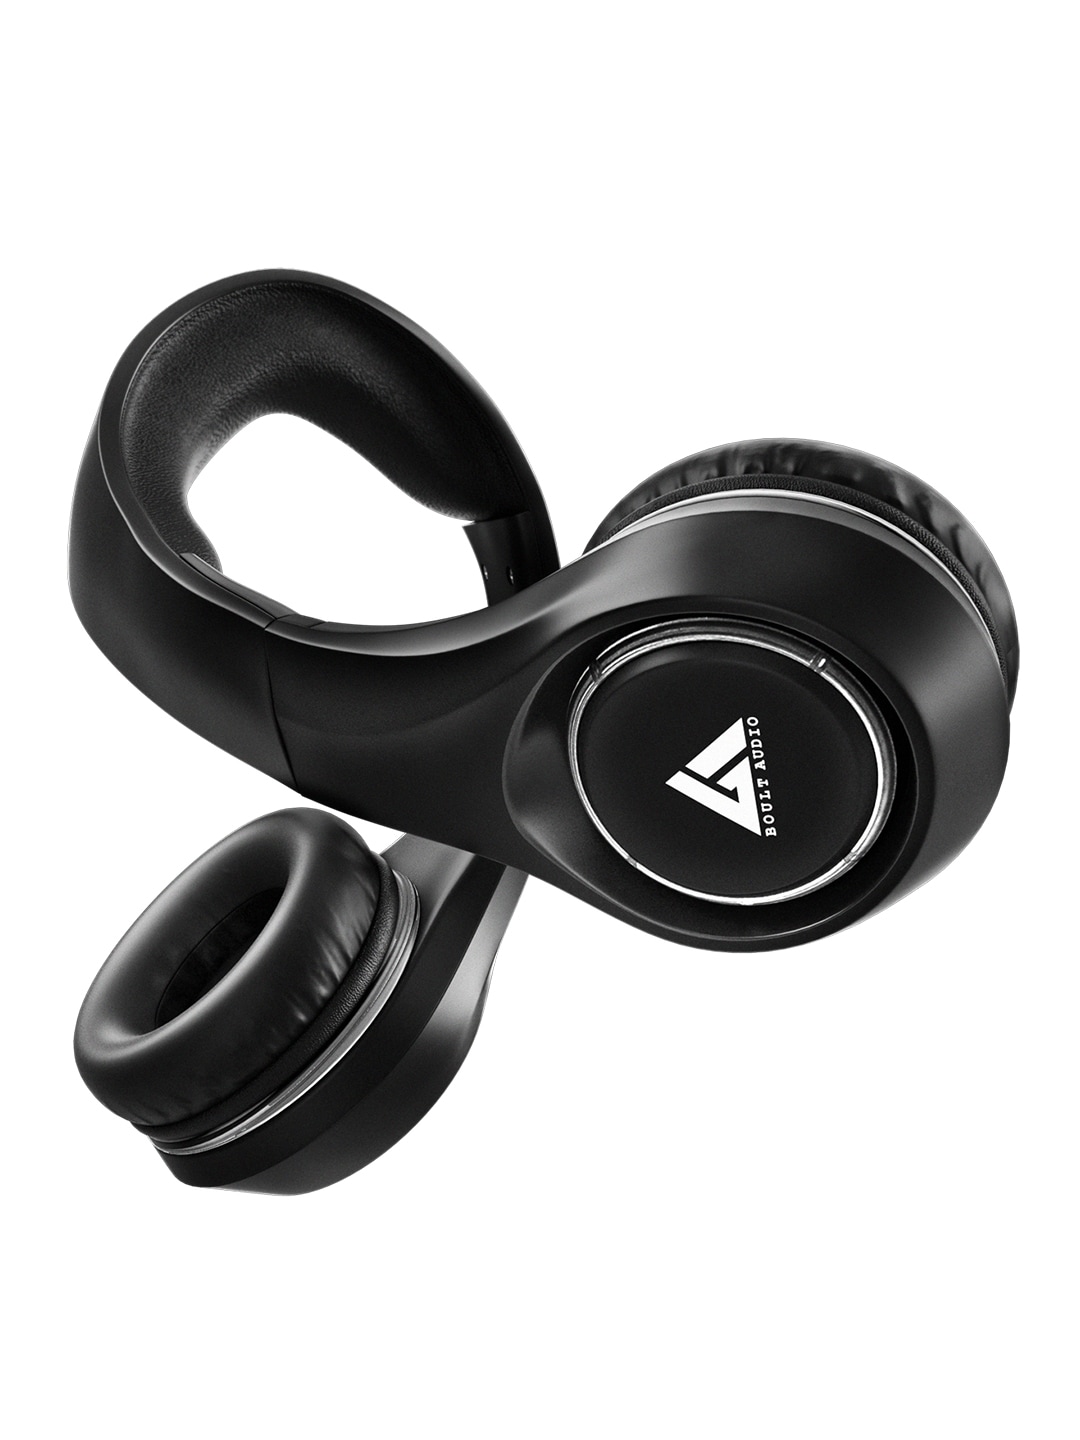 BOULT AUDIO ProBass FluidX Wireless Bluetooth Over The Ear Headphone with Mic - Black Price in India